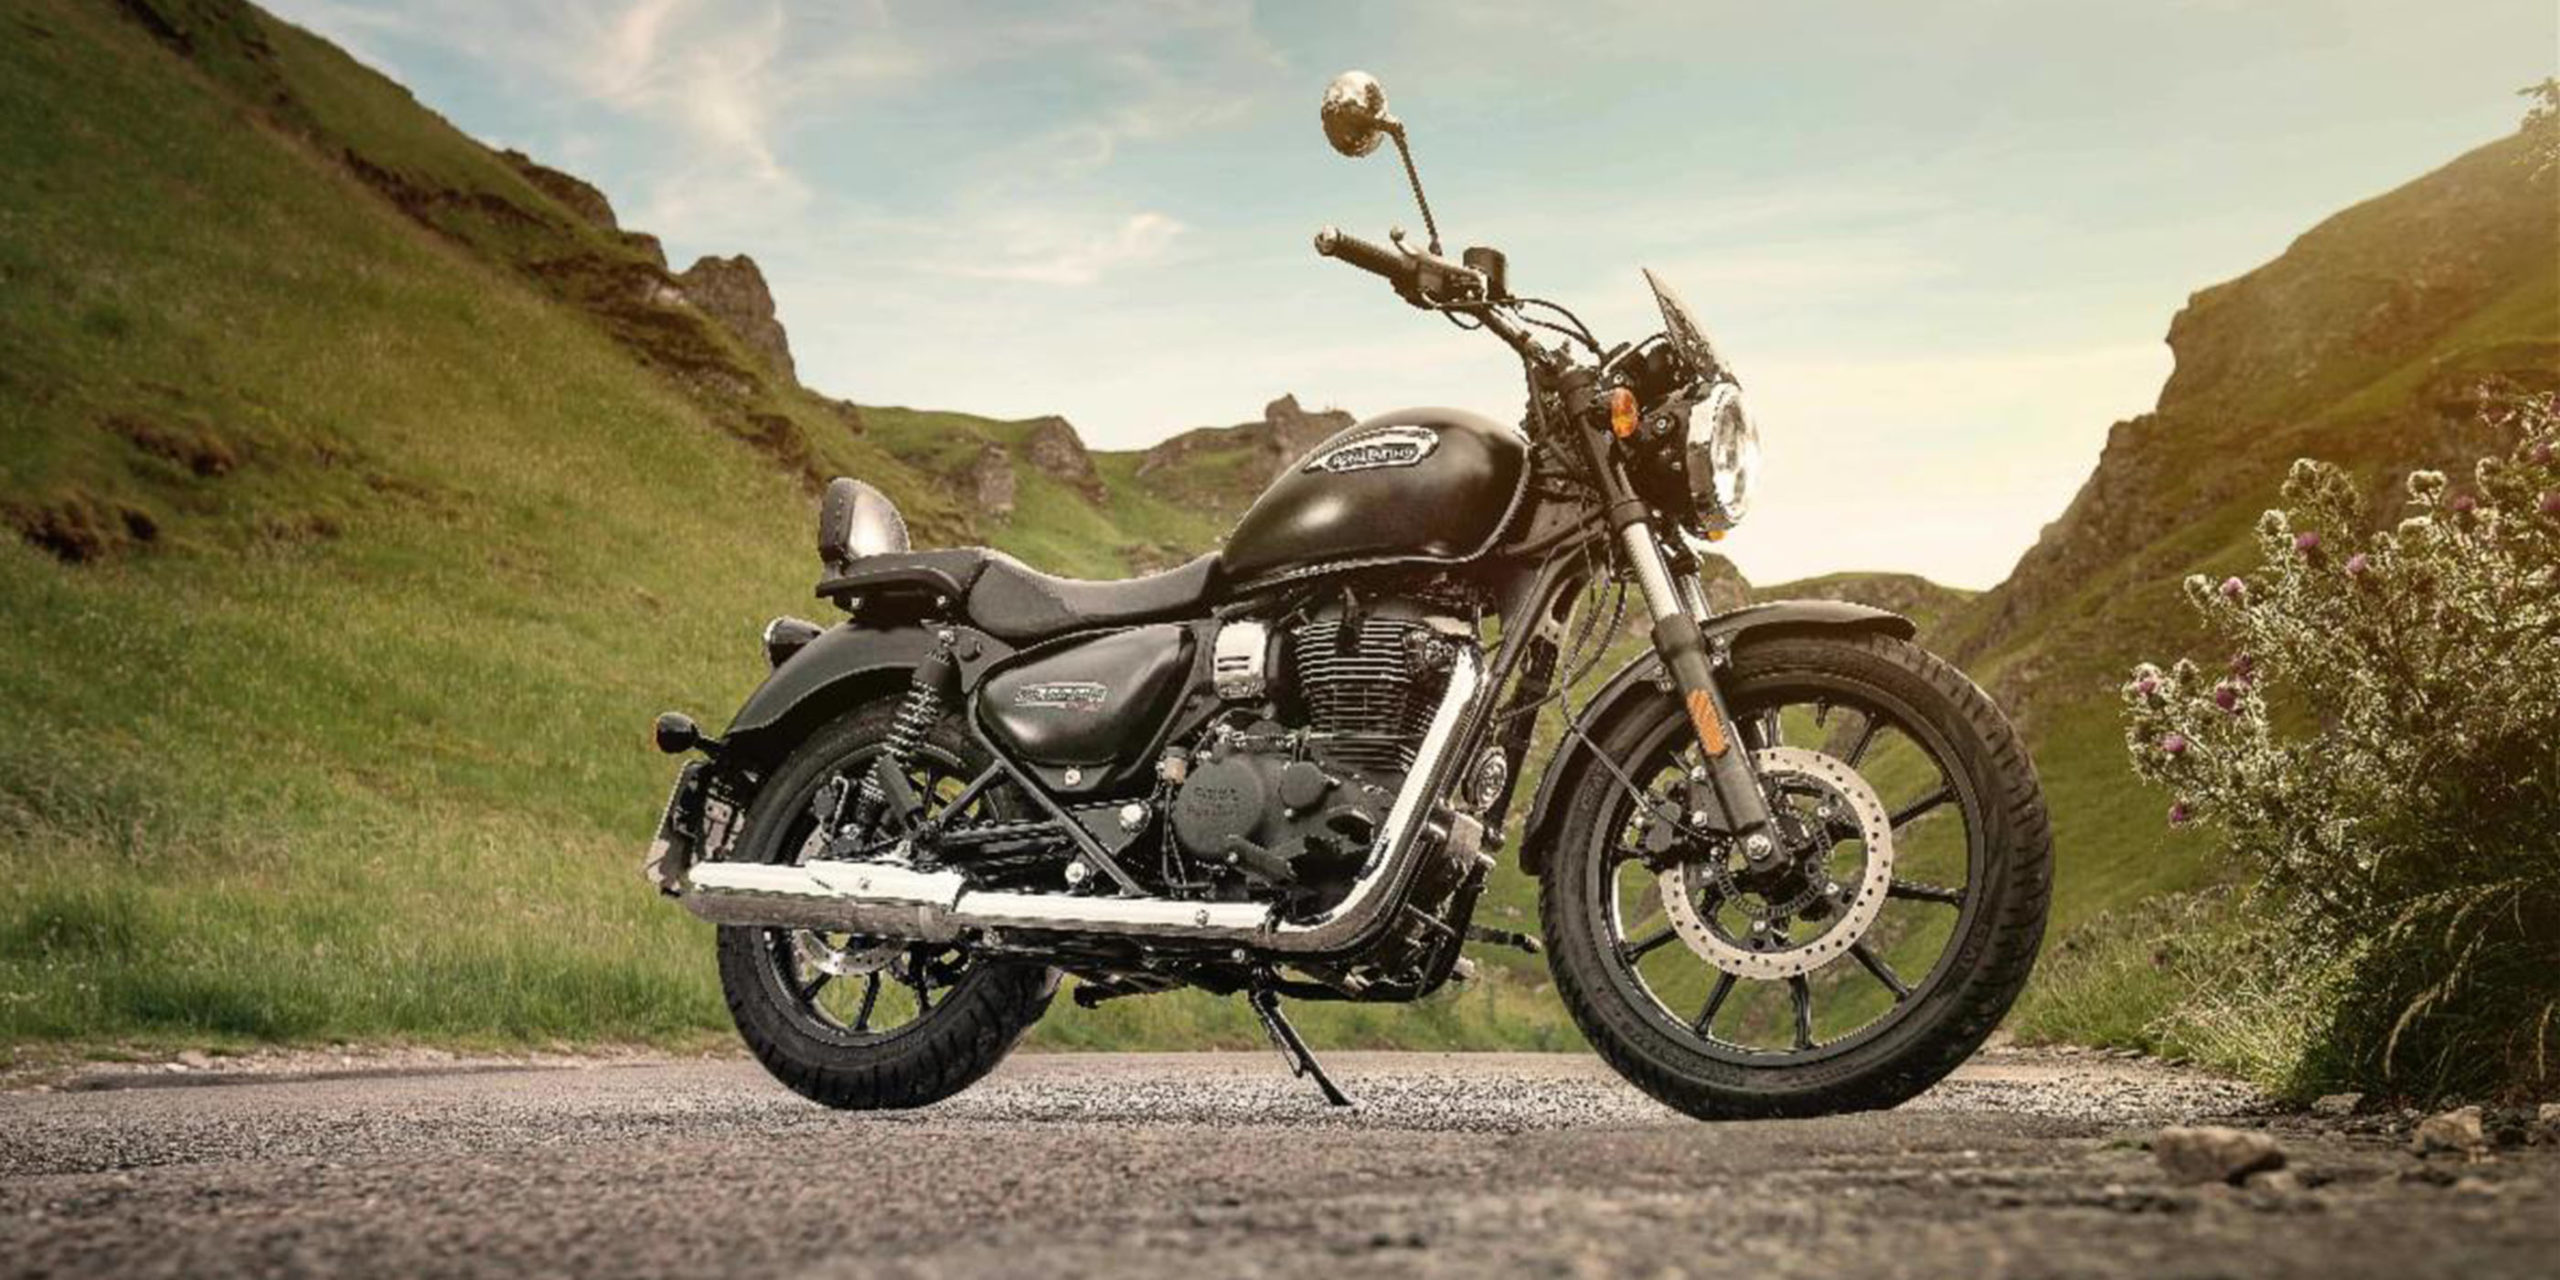 Royal Enfield Launches All-New Cruiser, Meteor 350 - Motorcycle &  Powersports News